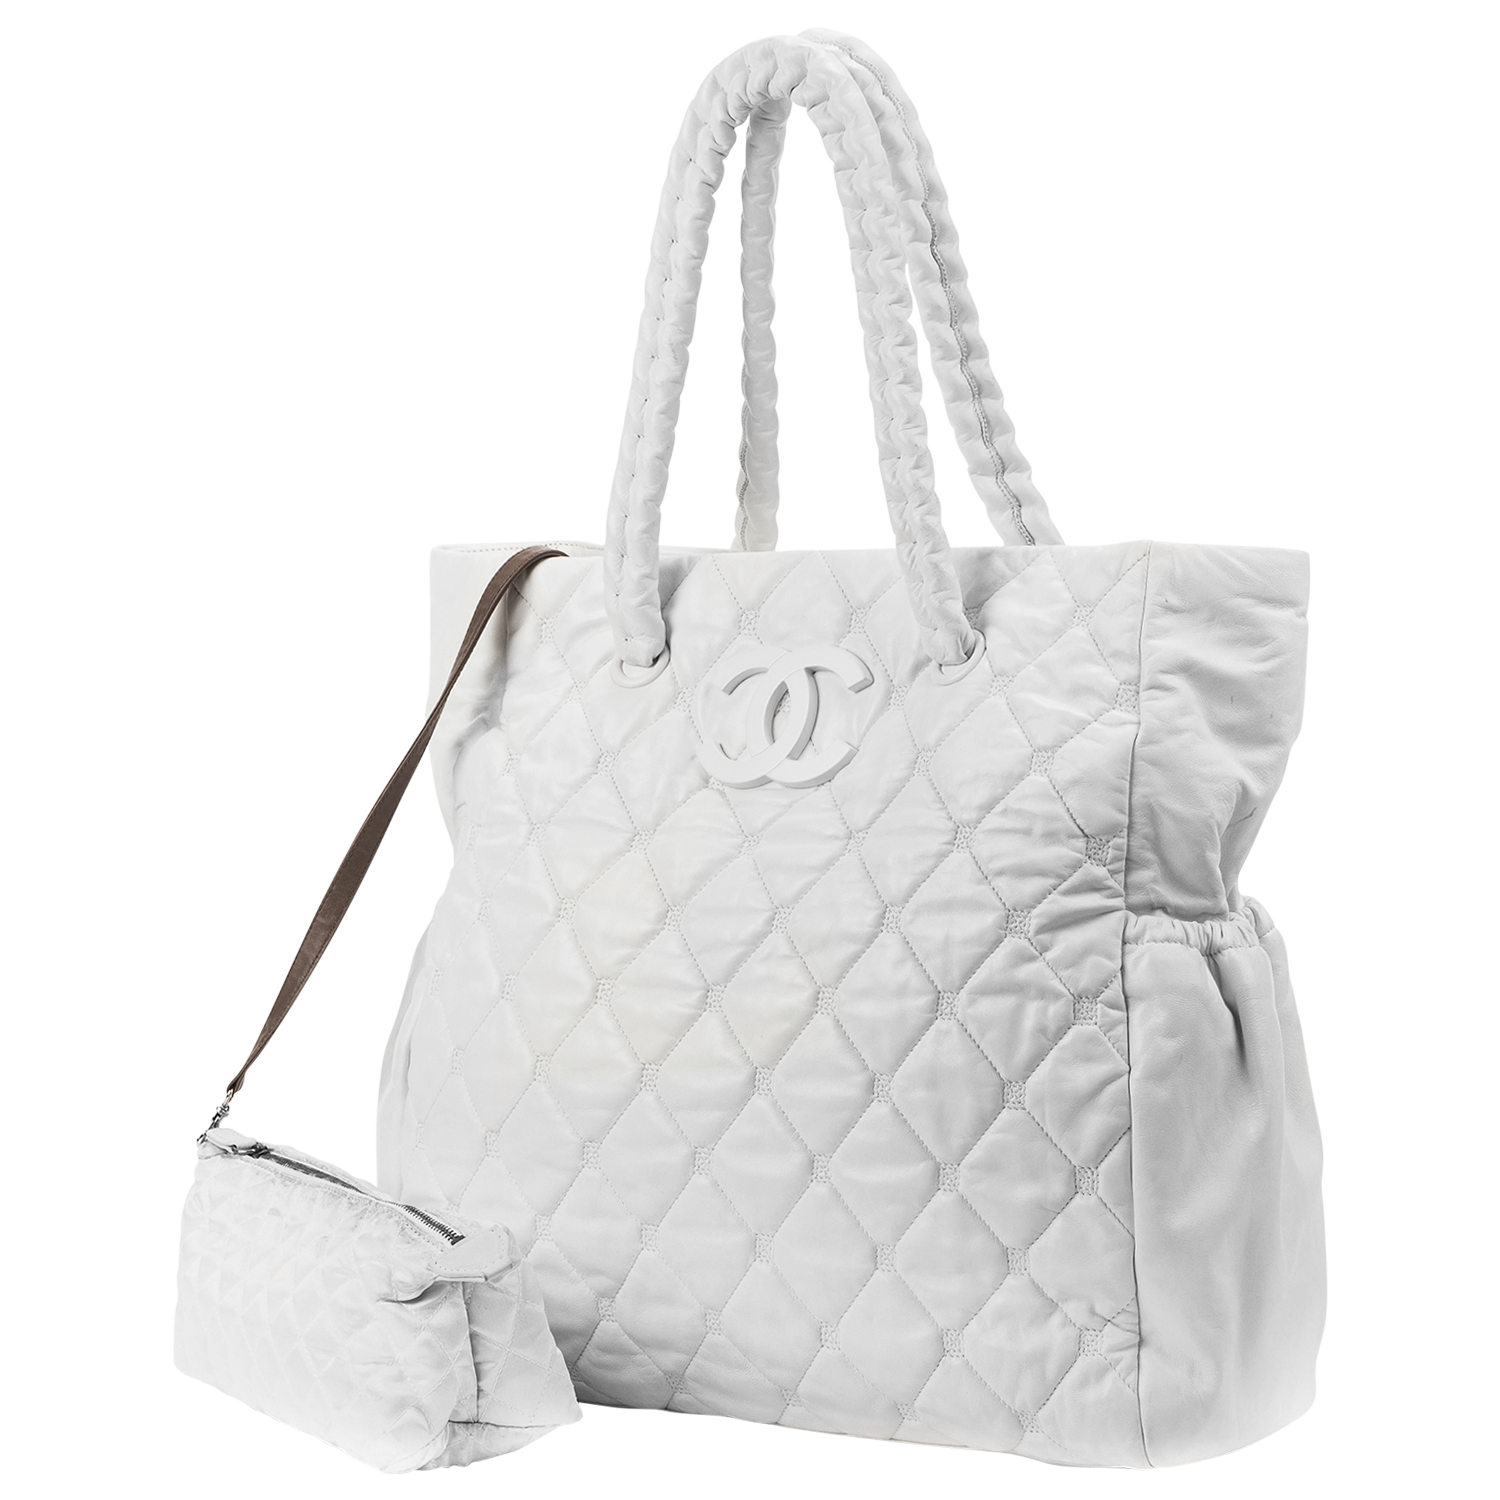 Chanel White and Green Quilted Number 5 Tote Bag · INTO